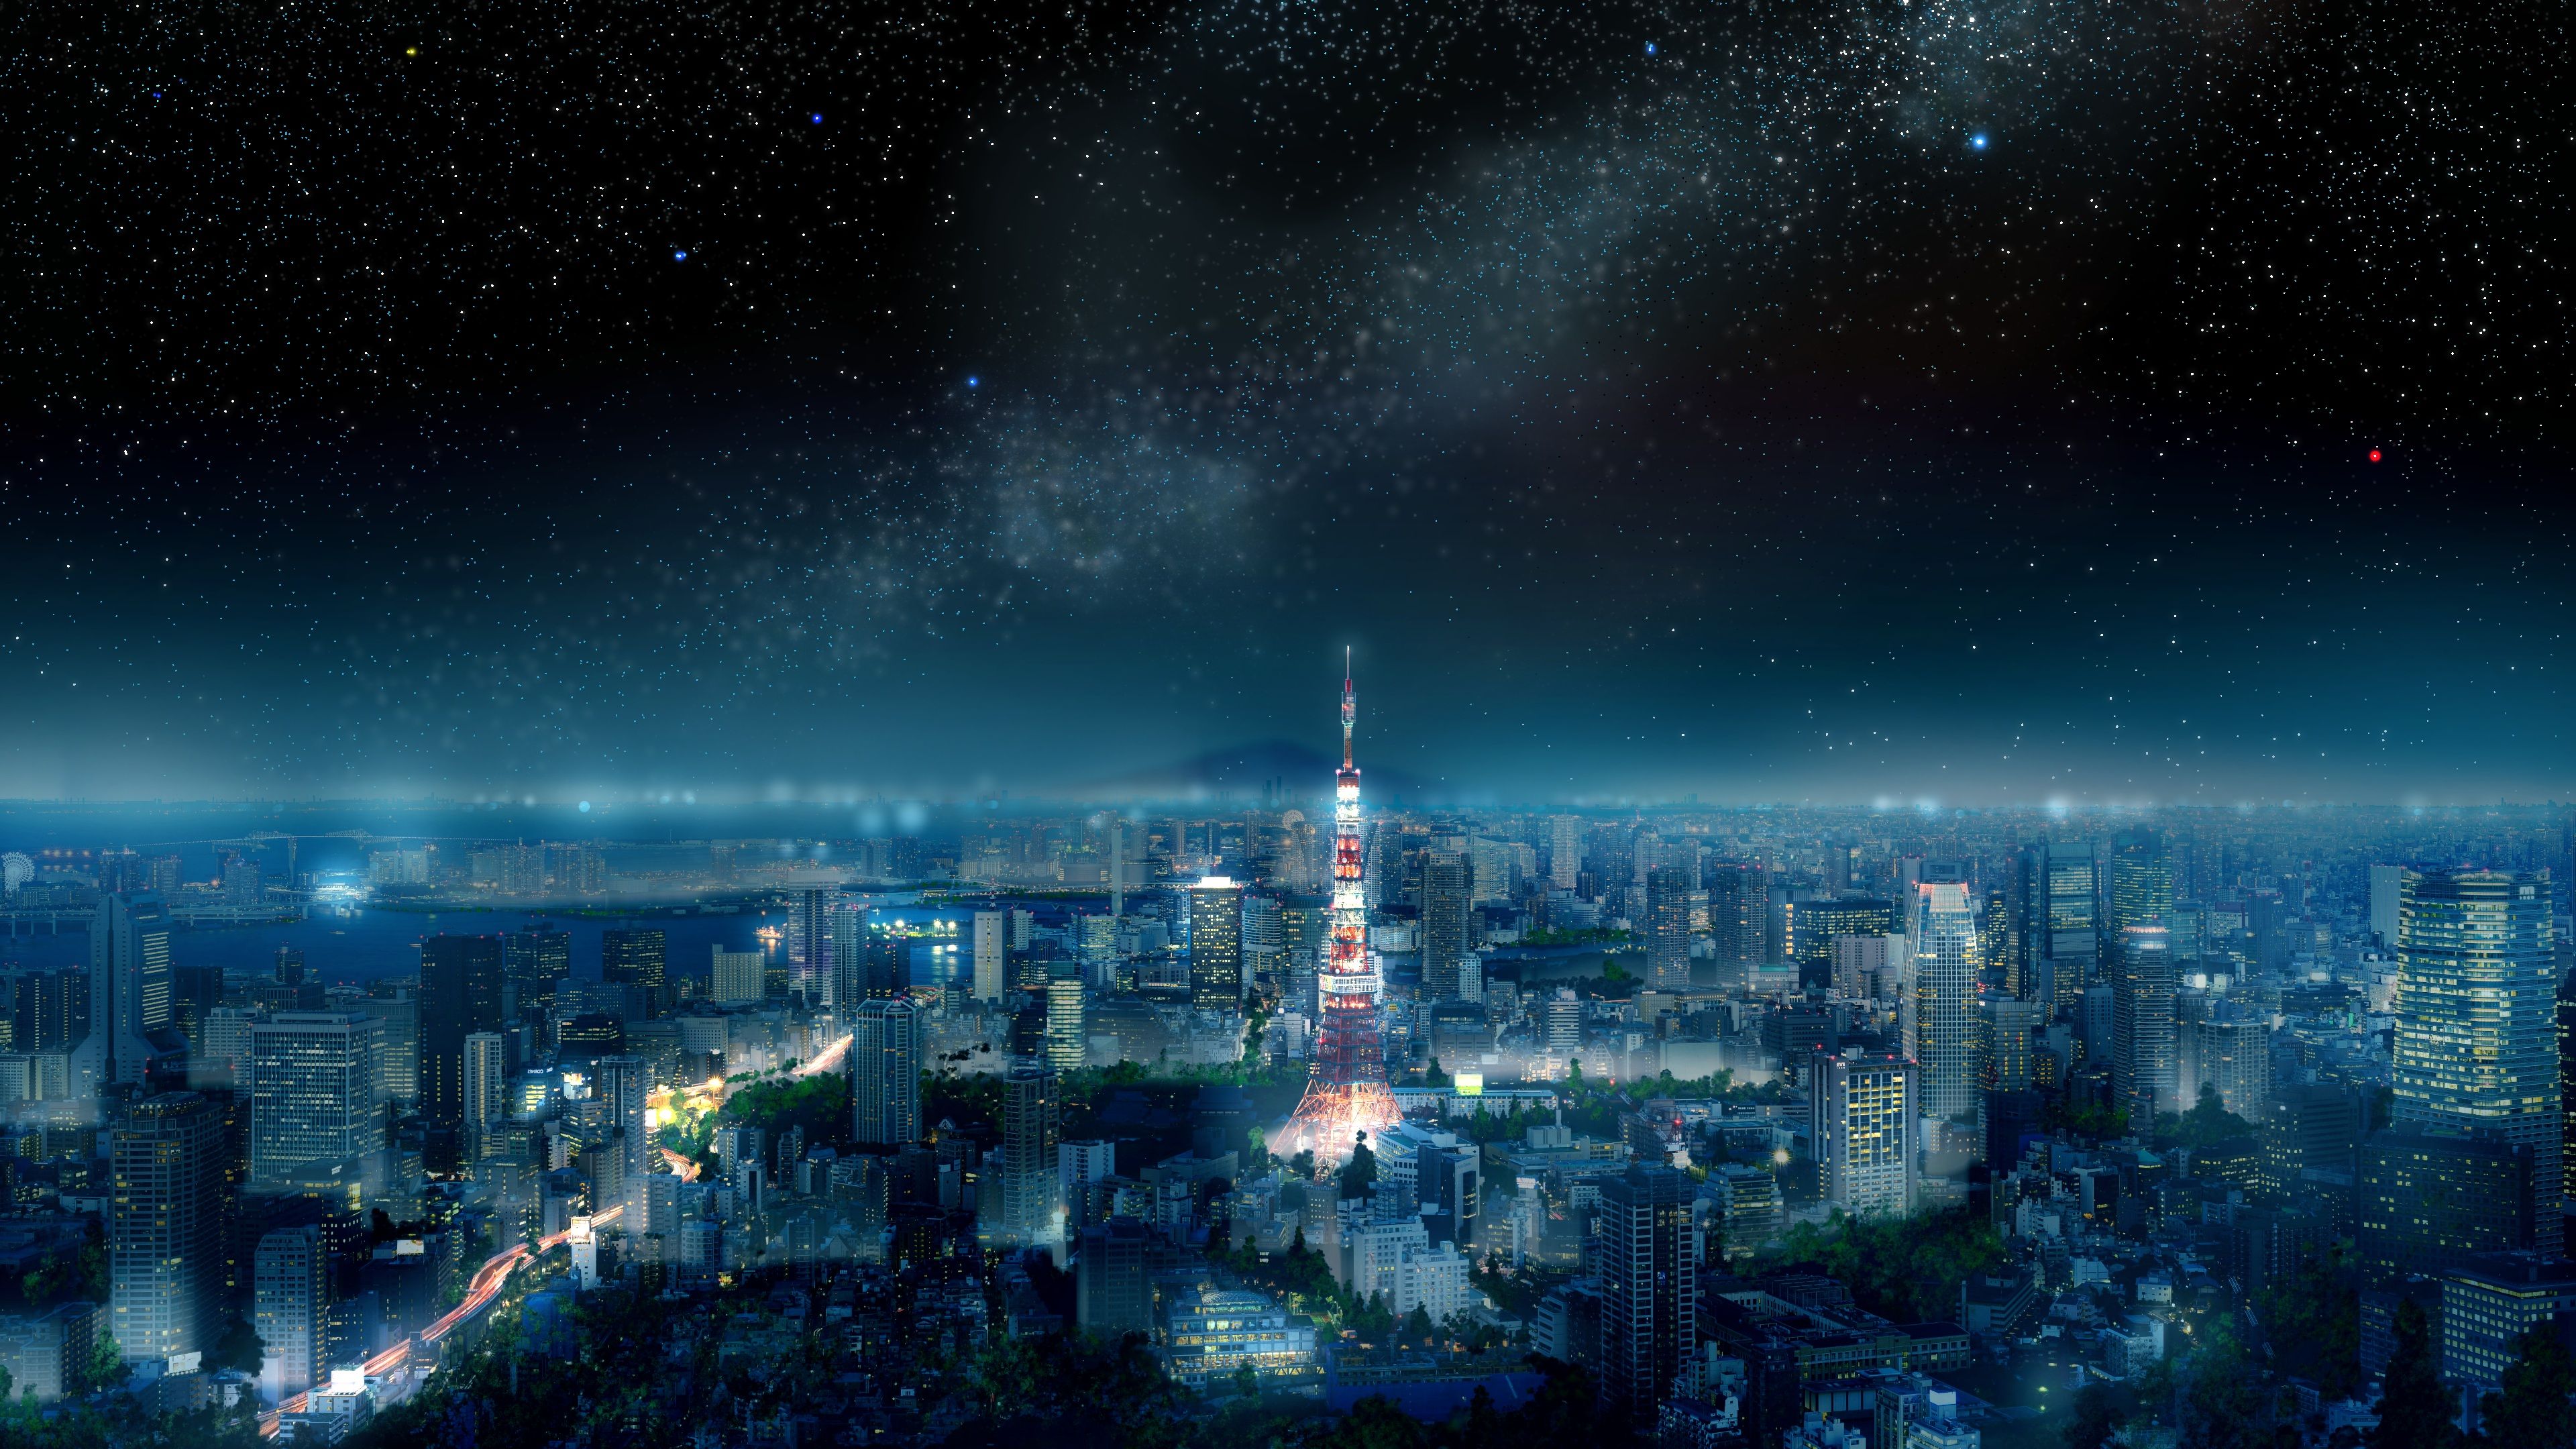 A city at night with stars in the sky - Tokyo